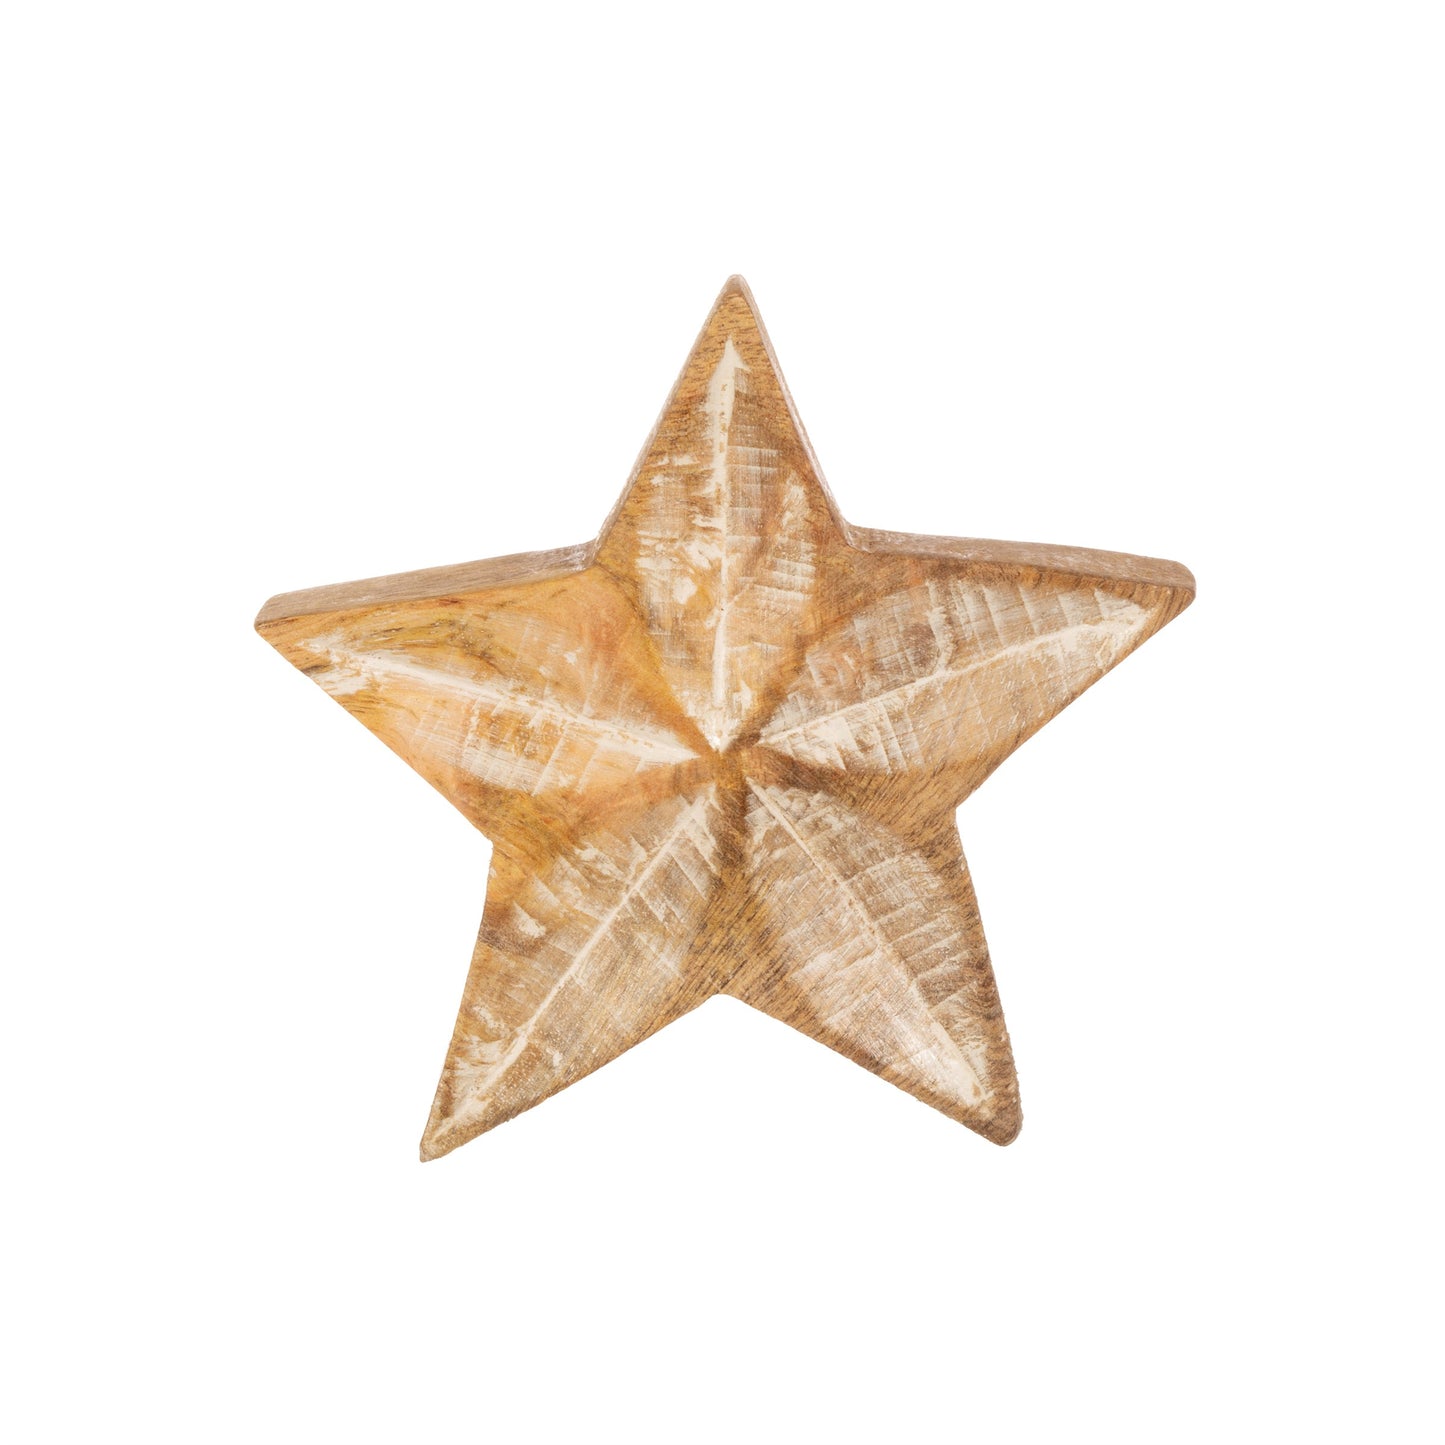 Whitewashed Wooden Star Standing Christmas Decoration (Small, Med or Large)